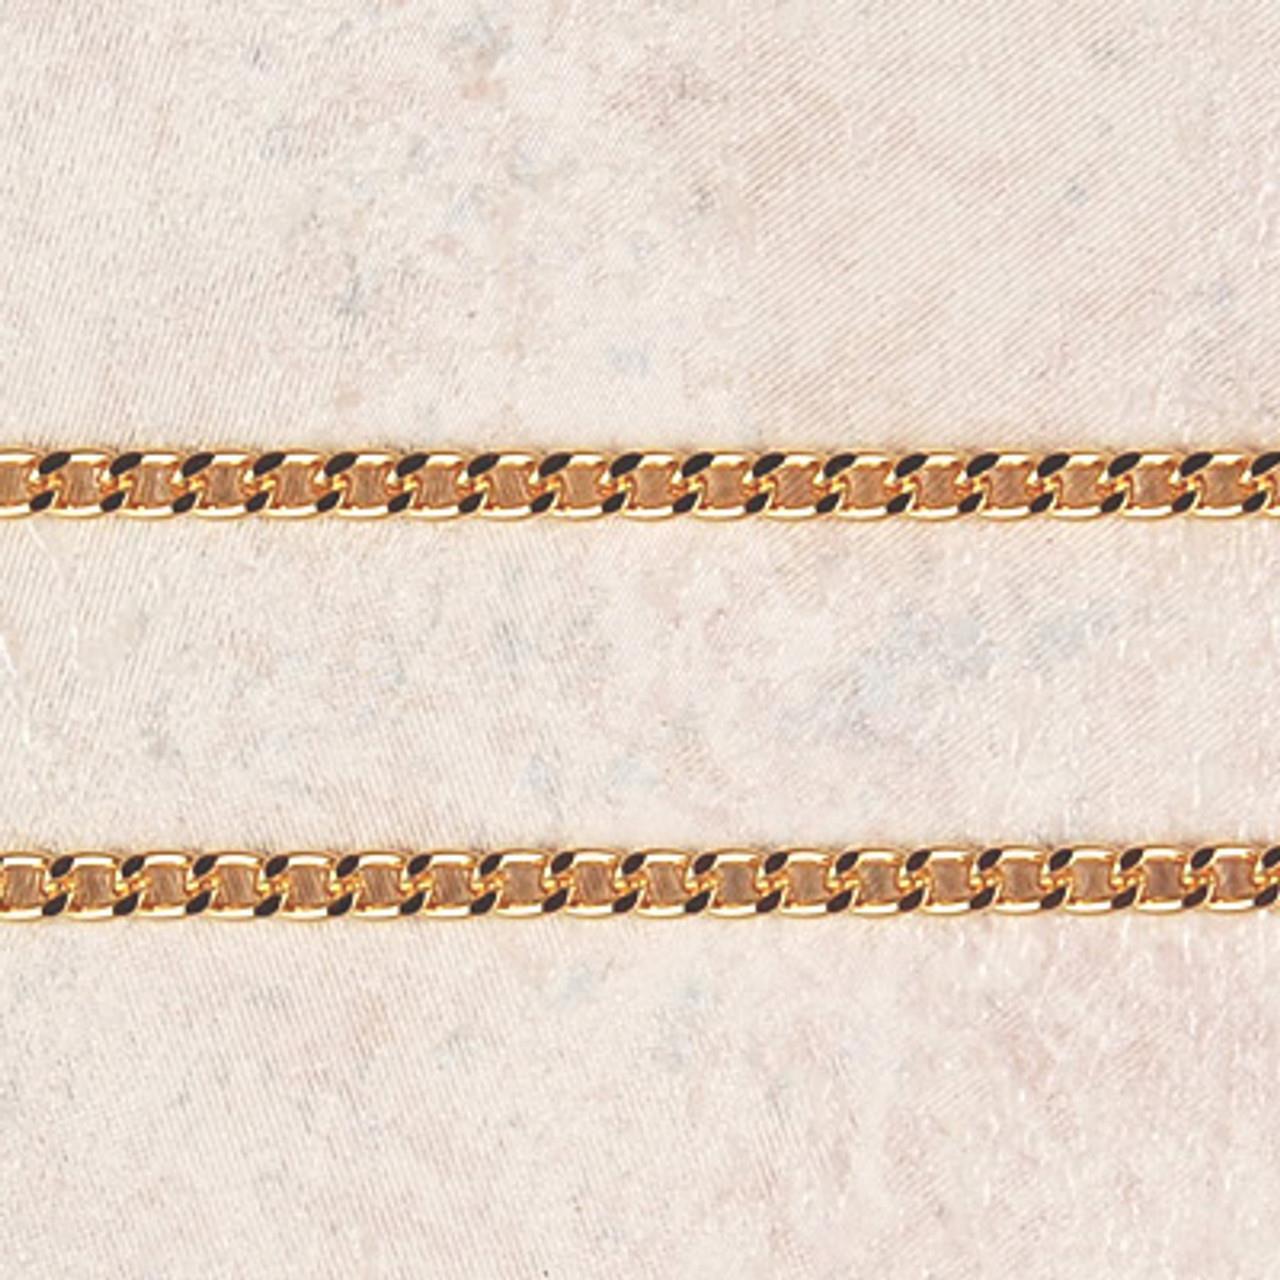 Gold Tone Heavy Chain with Clasp Size 24in Comes Carded